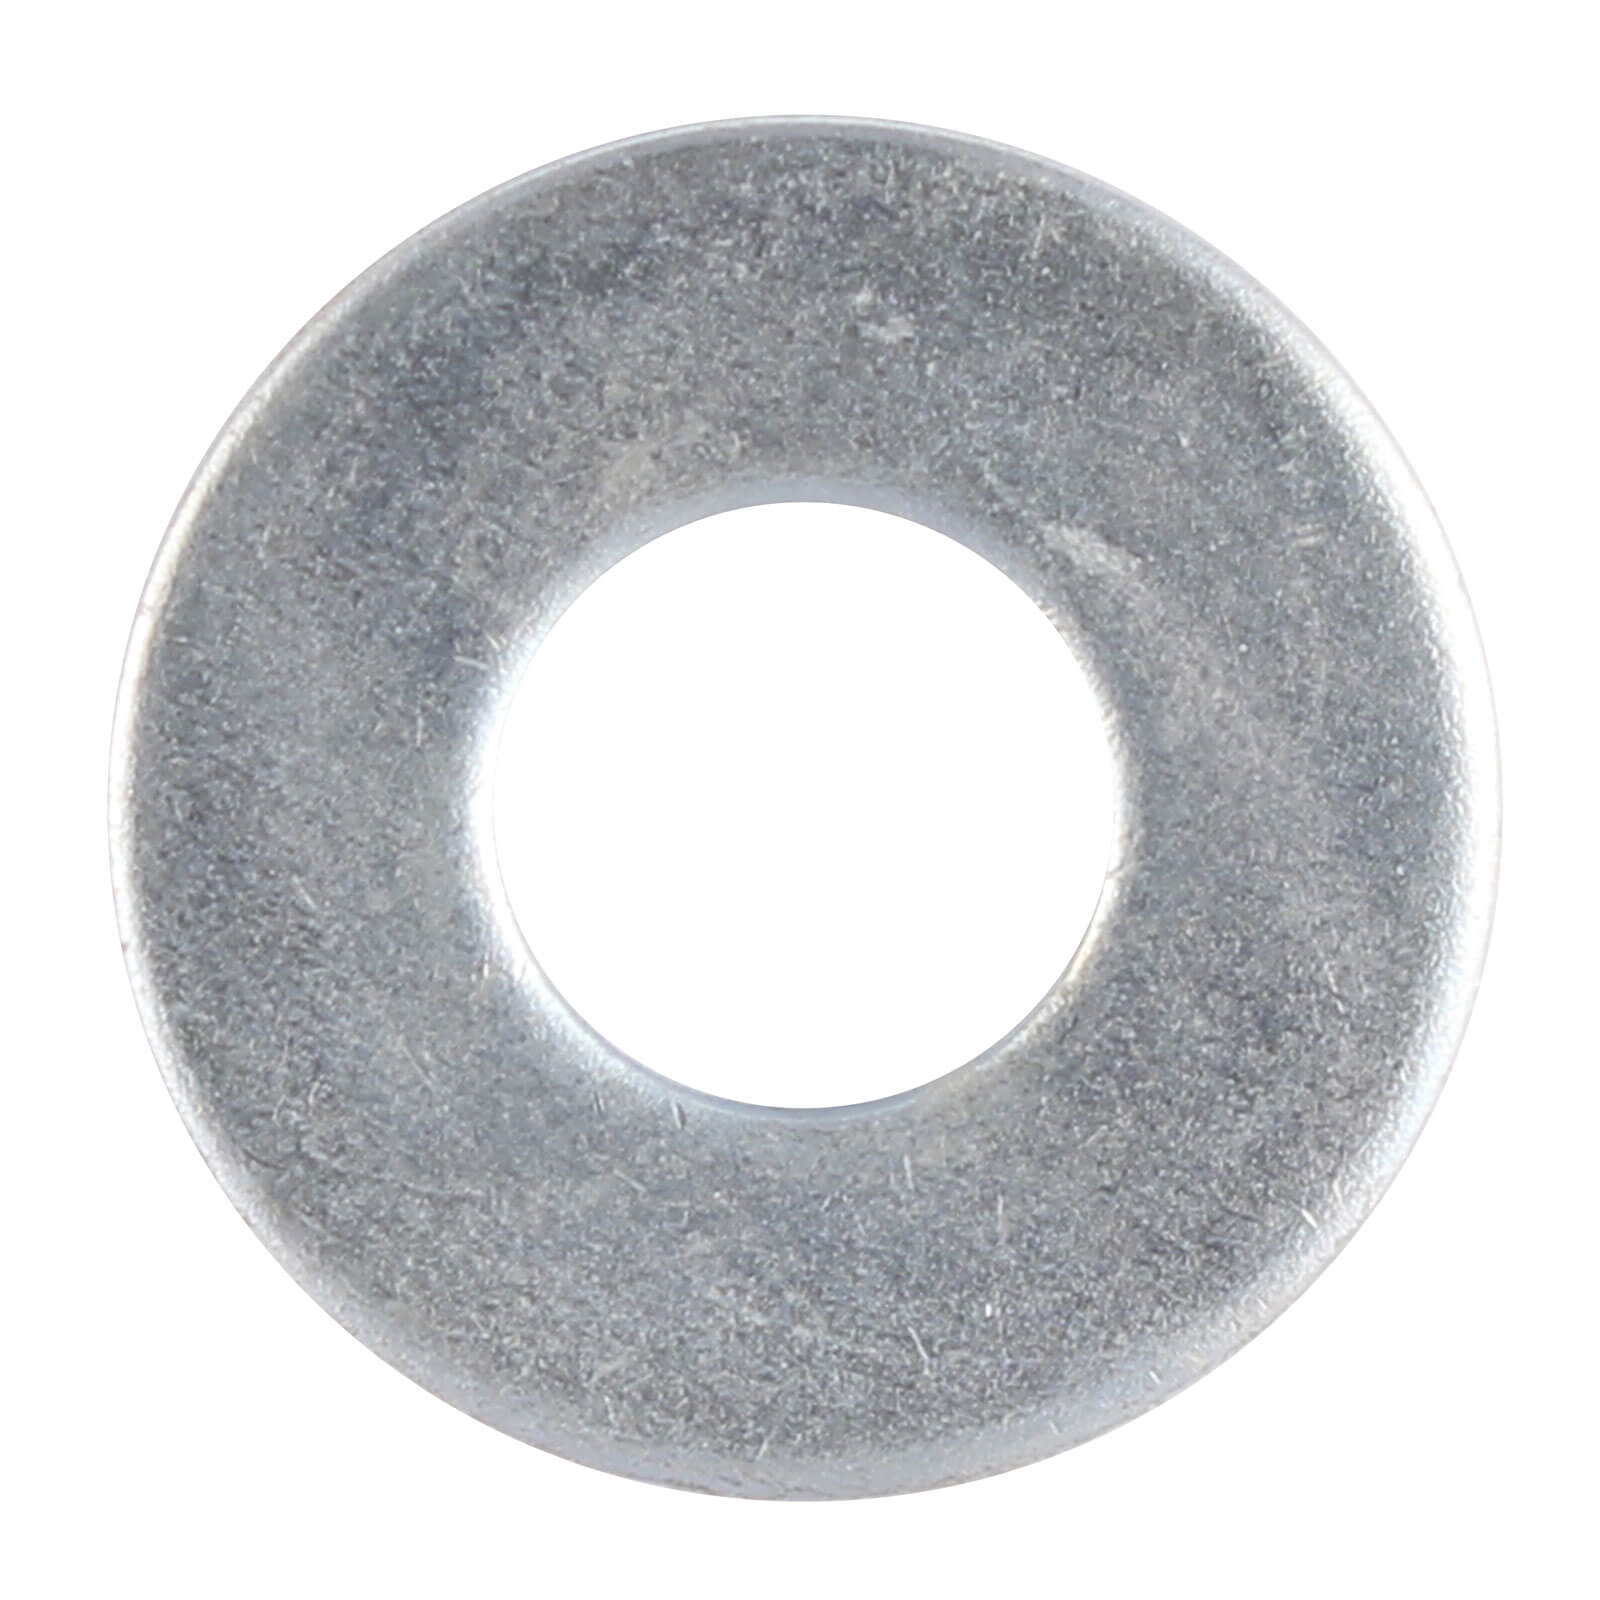 Washer Stainless Steel 10mm Pack of 10